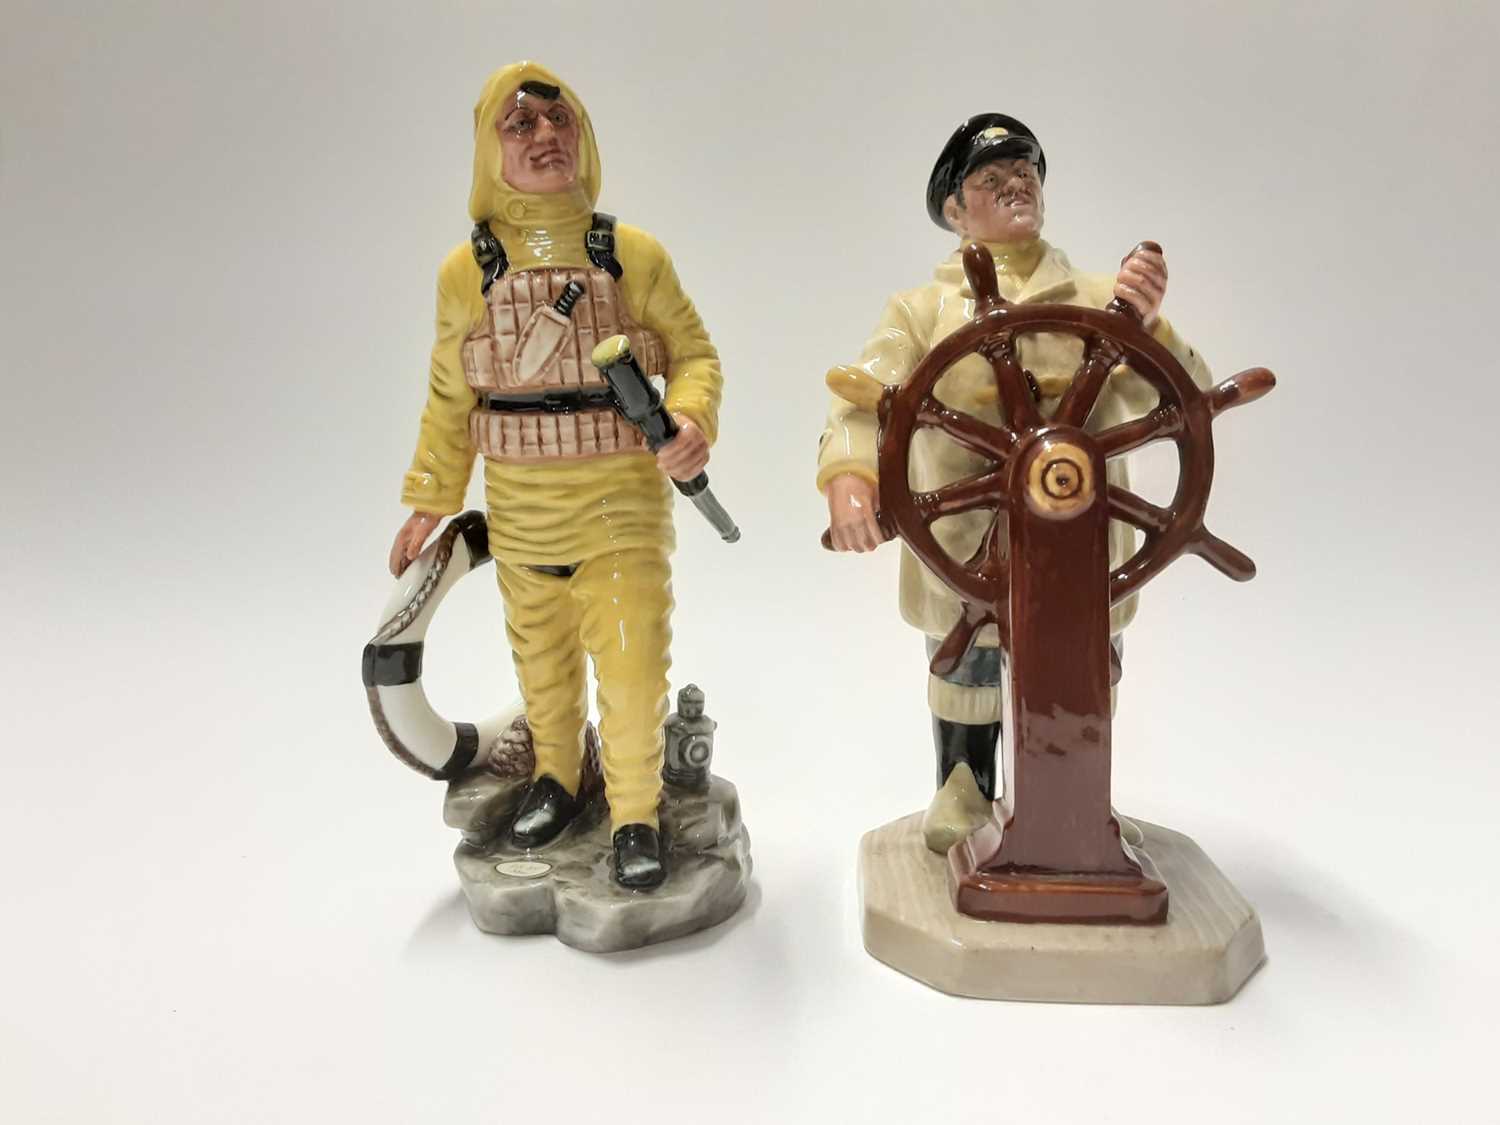 Lot 140 - Two Royal Doulton figures - The Lifeboatman HN2764 and The Helmsman HN2499